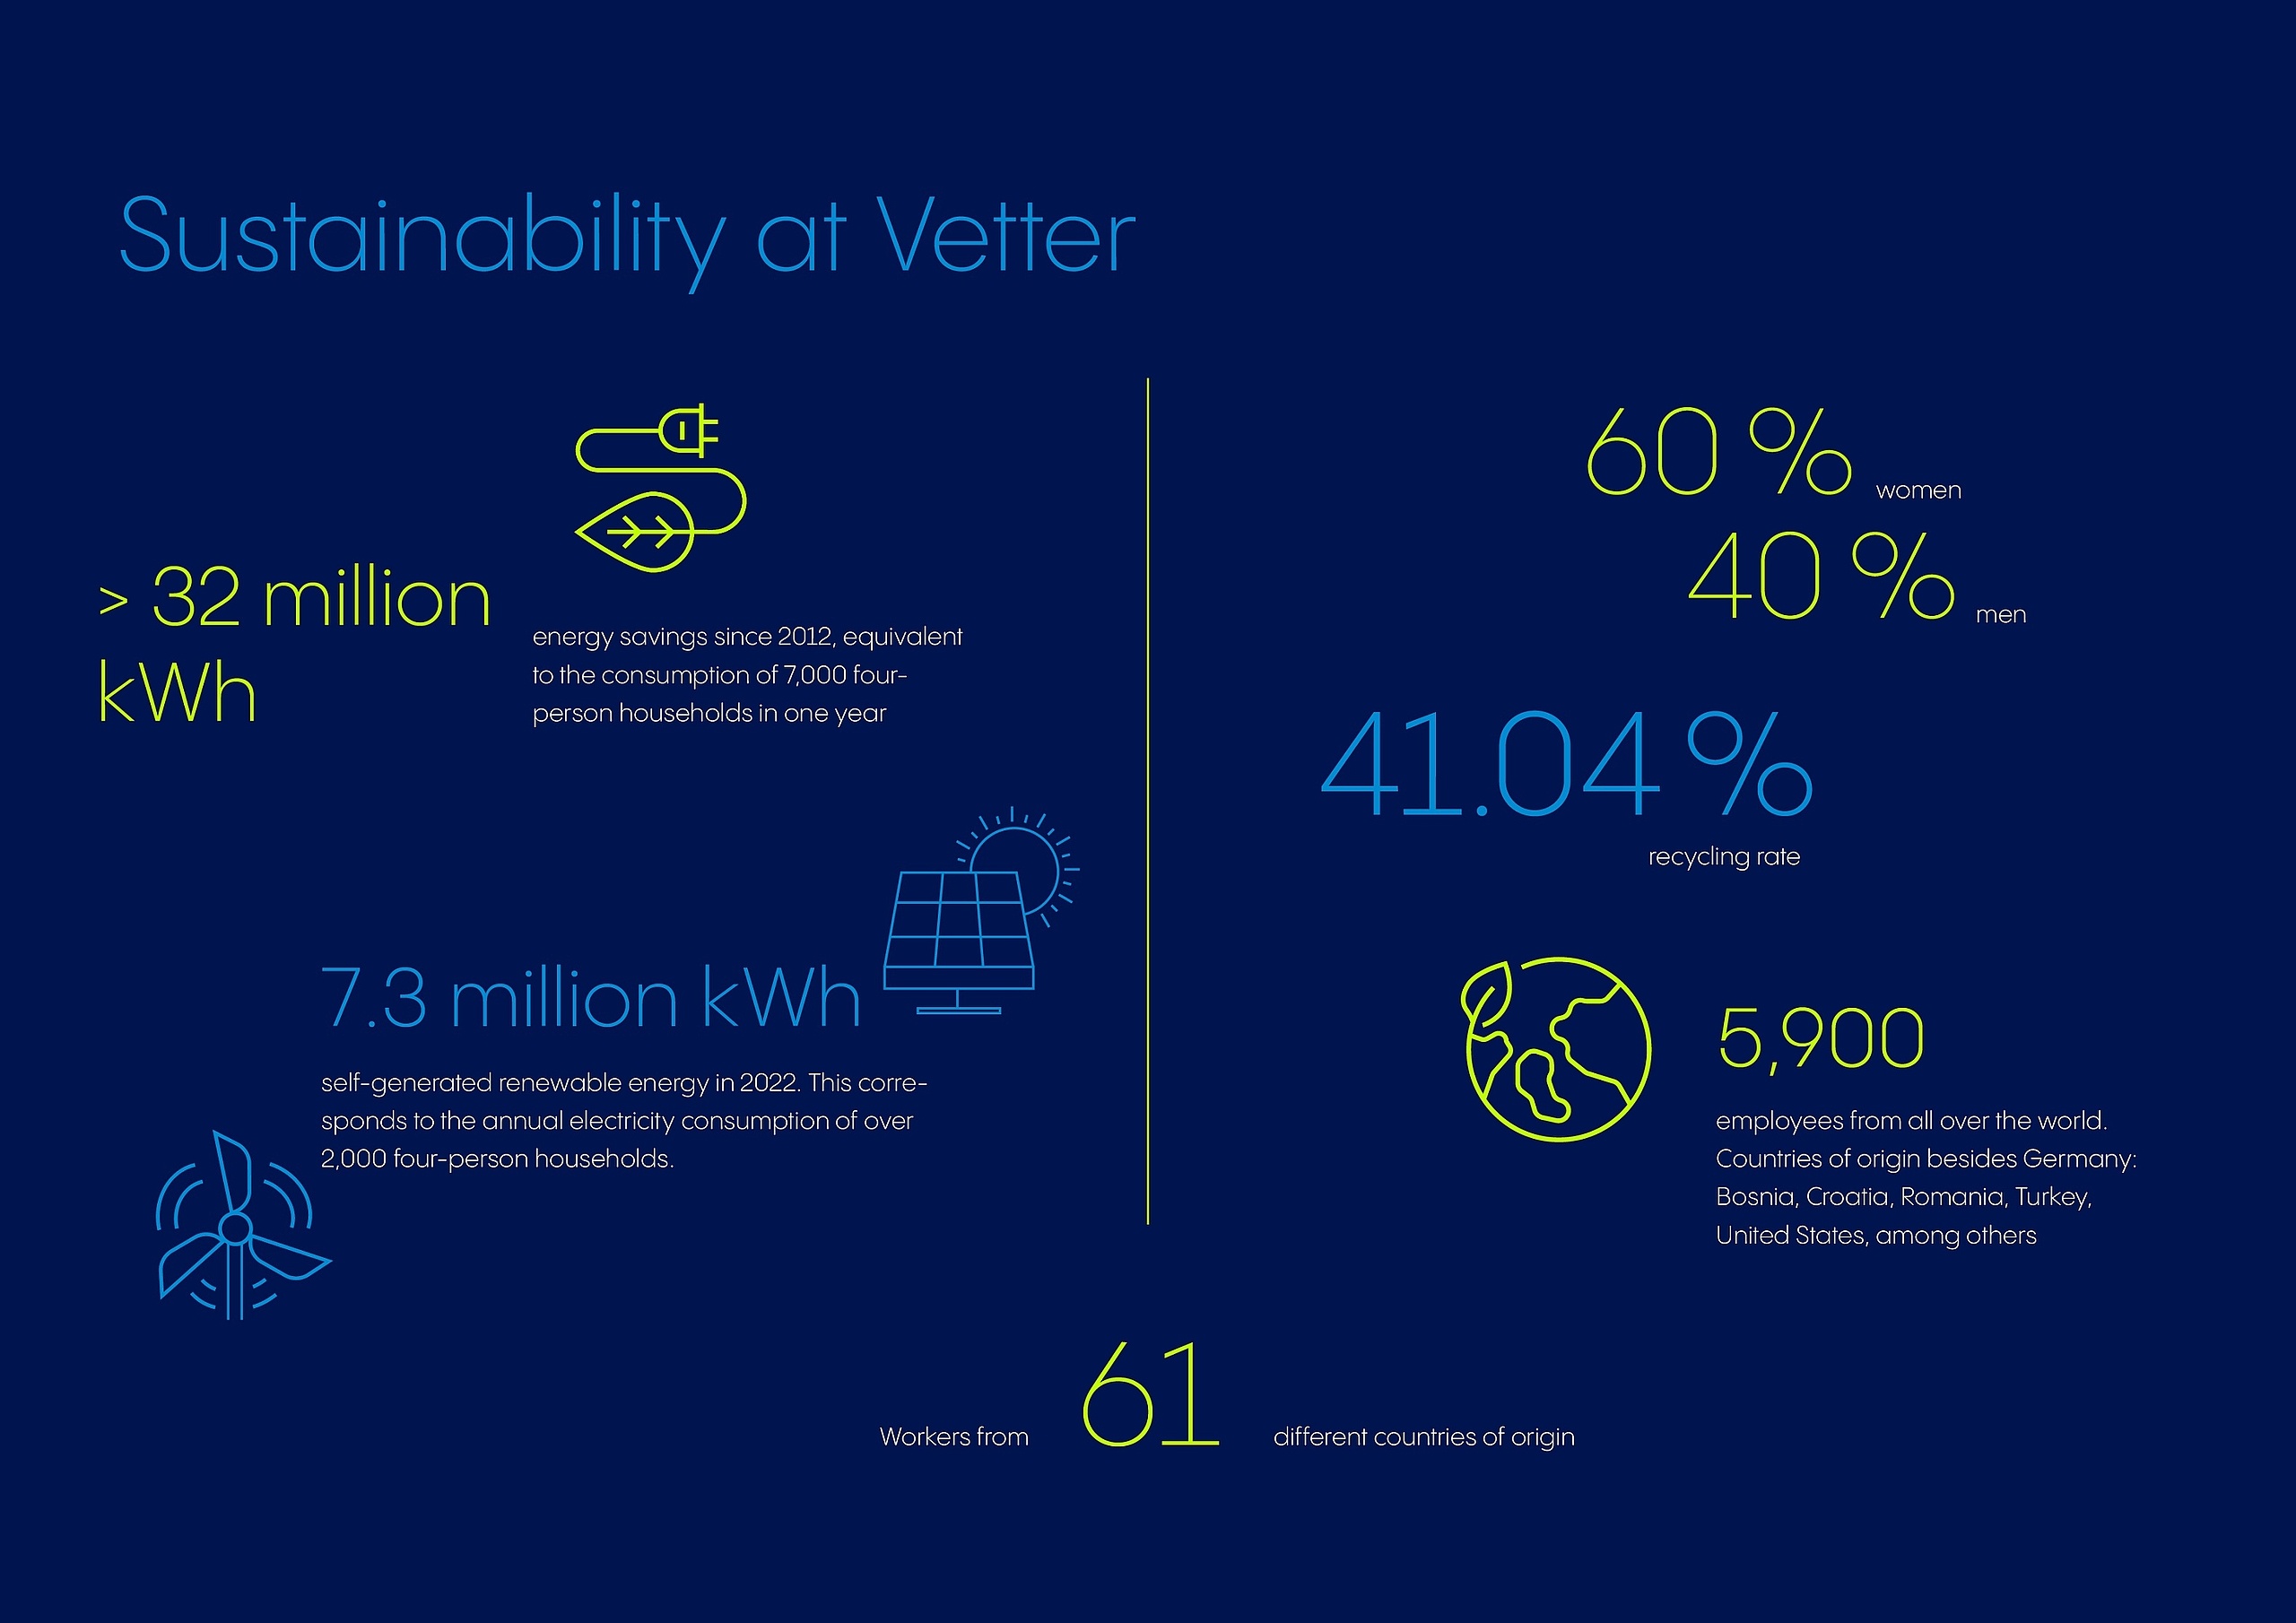 Sustainability Report Infographic